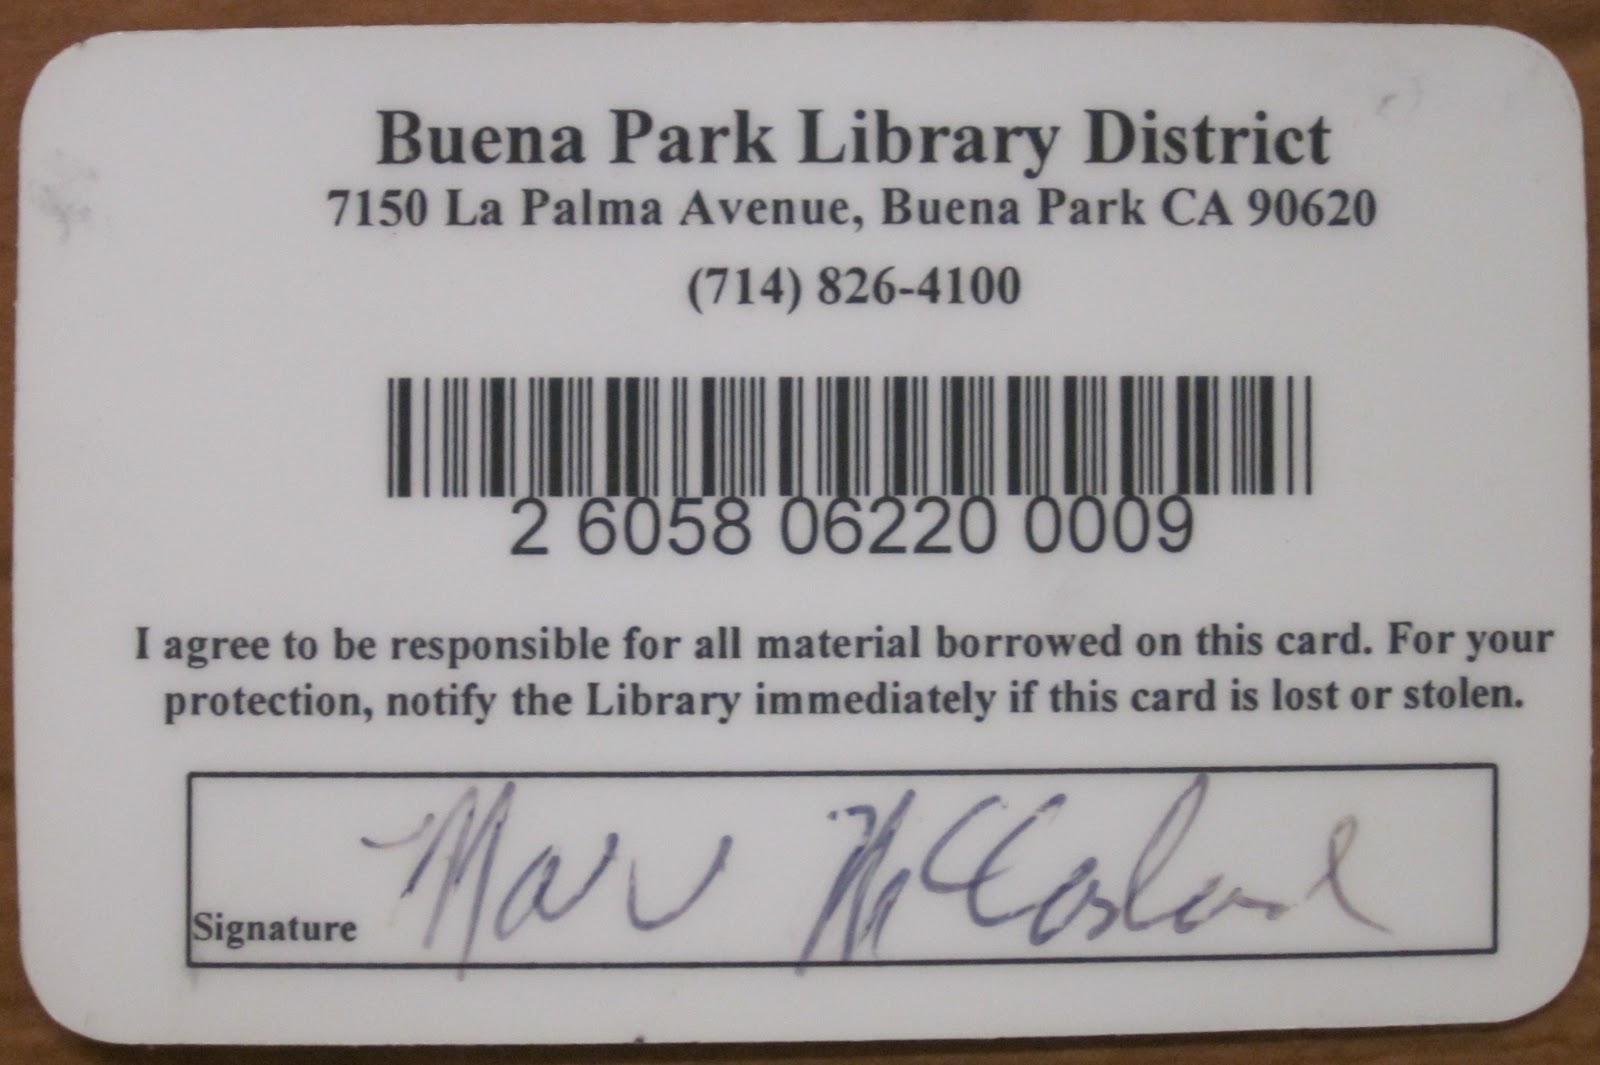 evolution-of-bpld-s-library-cards-part-1-the-buena-park-library-blog